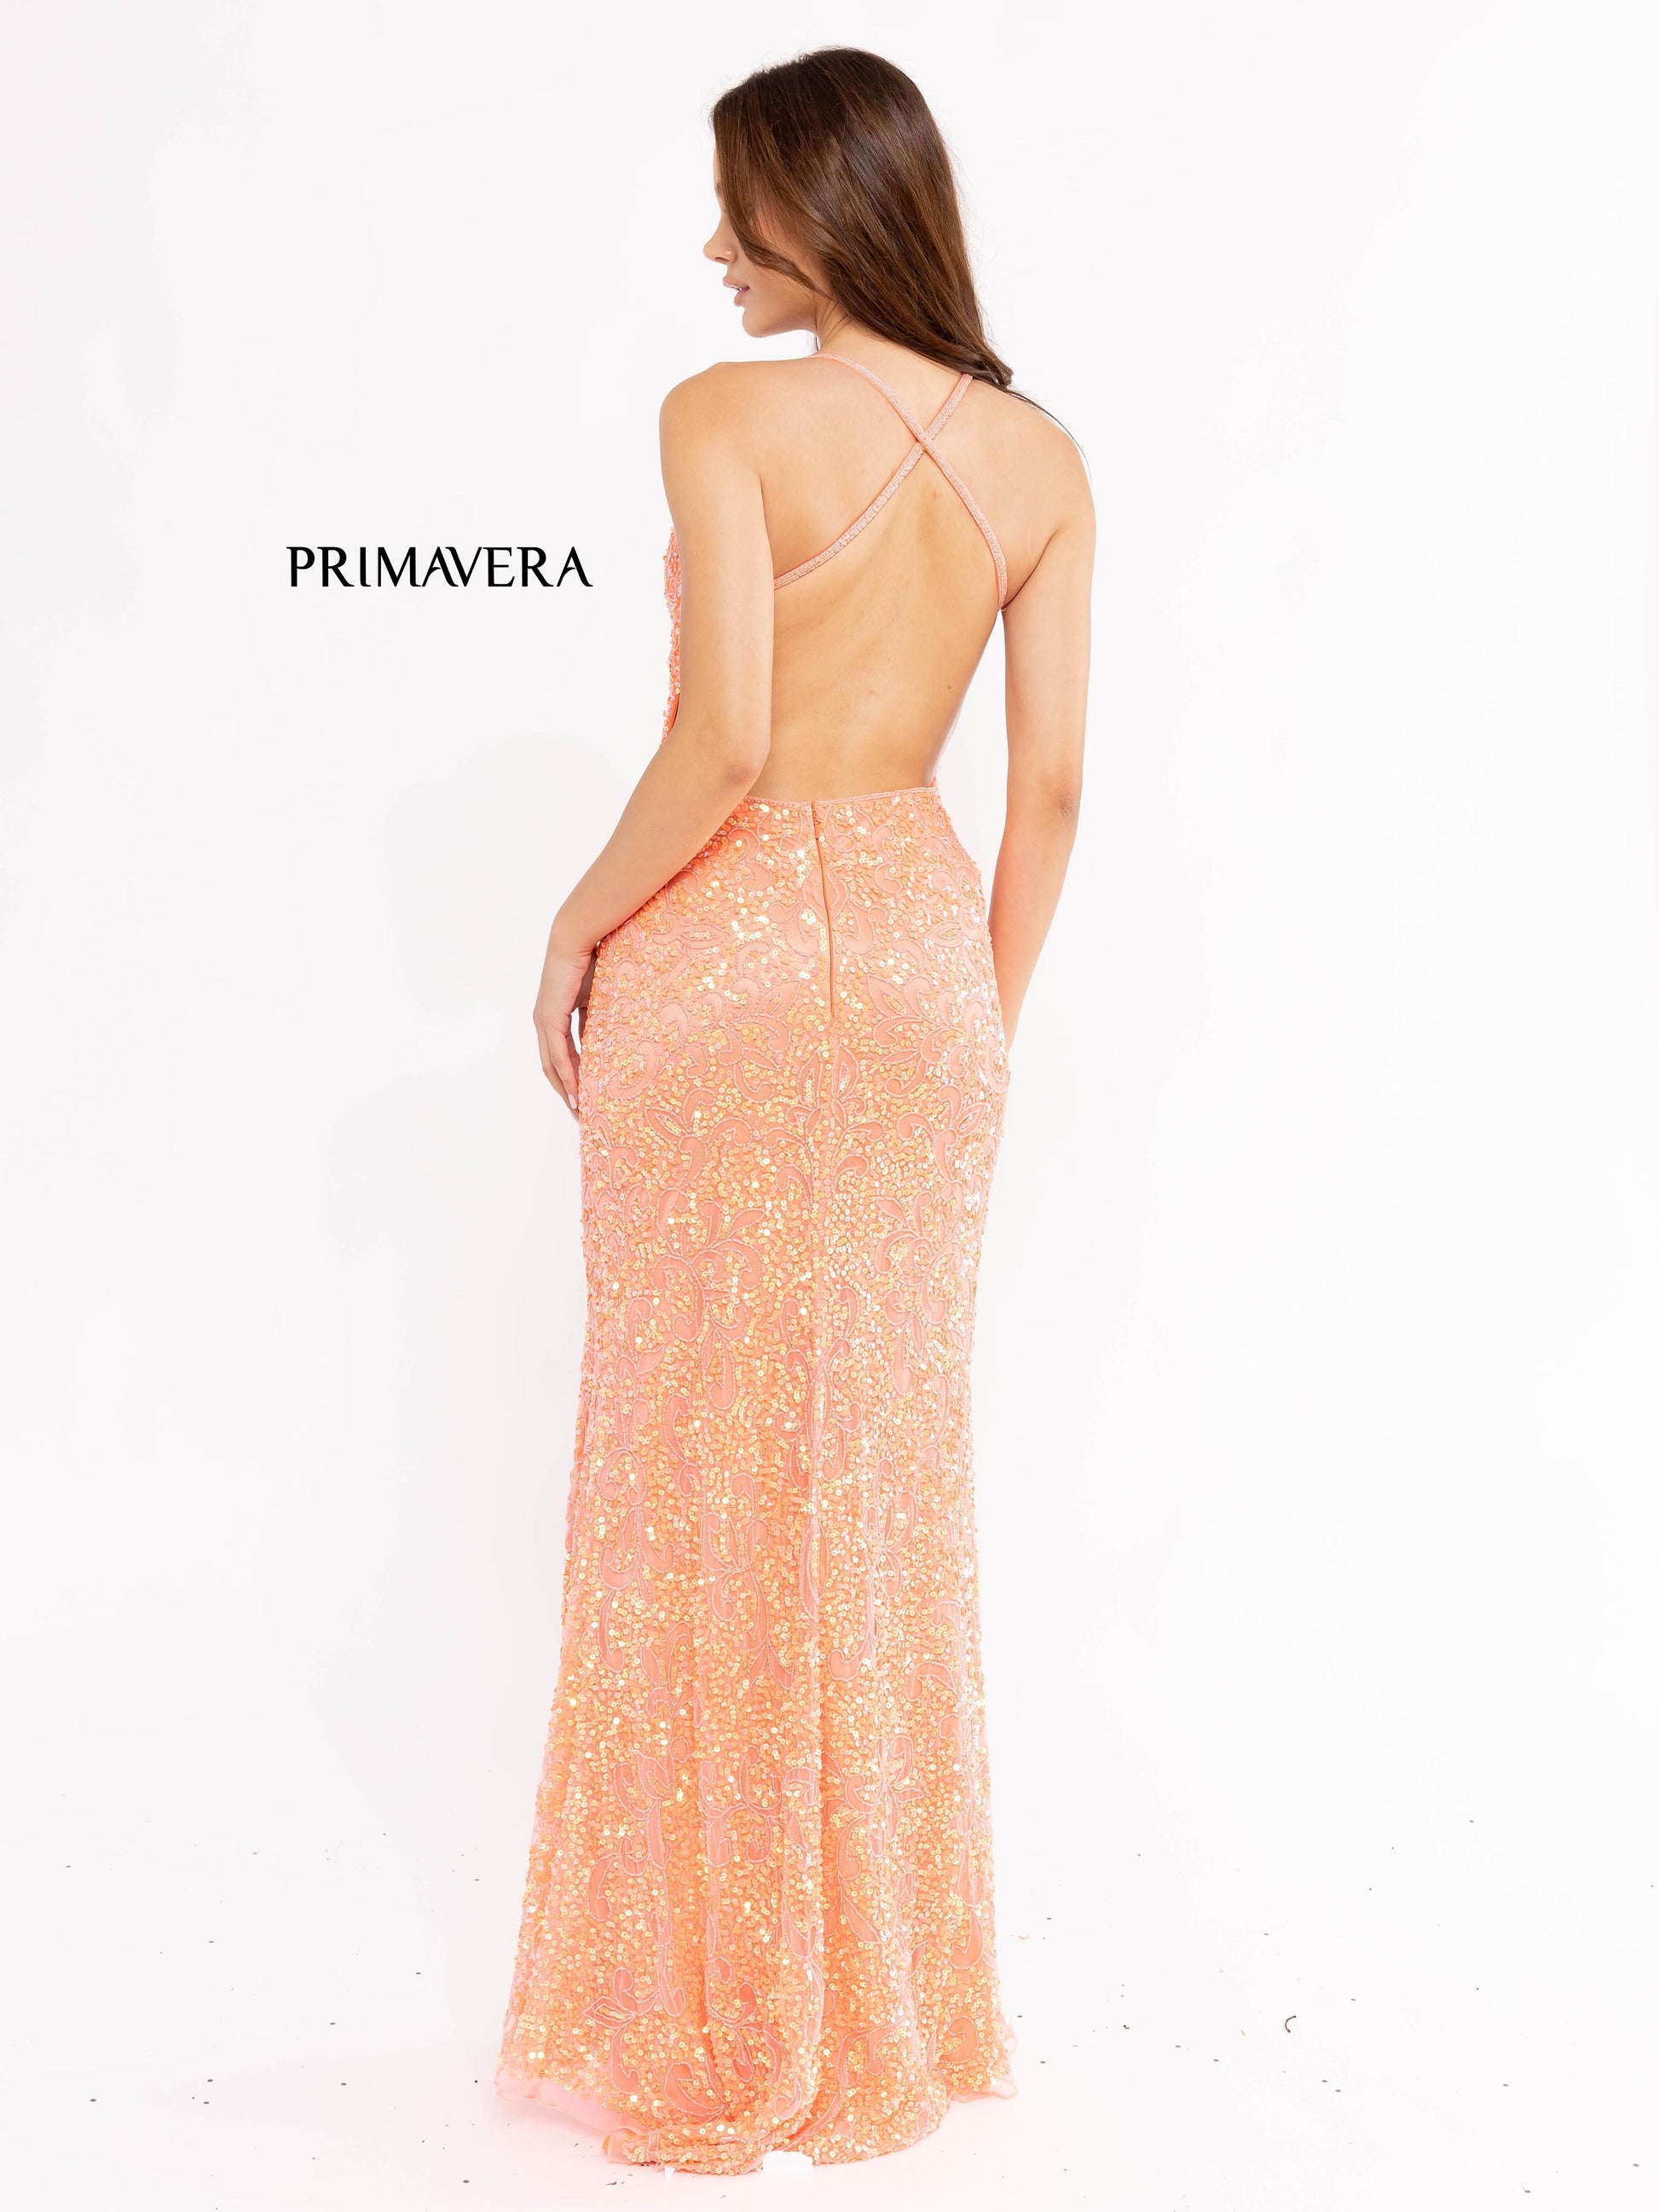 Primavera Couture 3295 Exclusive  Prom Dress, Formal Evening Gown.  This exclusive prom dress is designed with sequins throughout.  I has a V neckline with beaded spaghetti straps that crisscross in the open back.  It is long with a left side slit.  Available Colors:  Neon Coral  Available Sizes: 0, 6